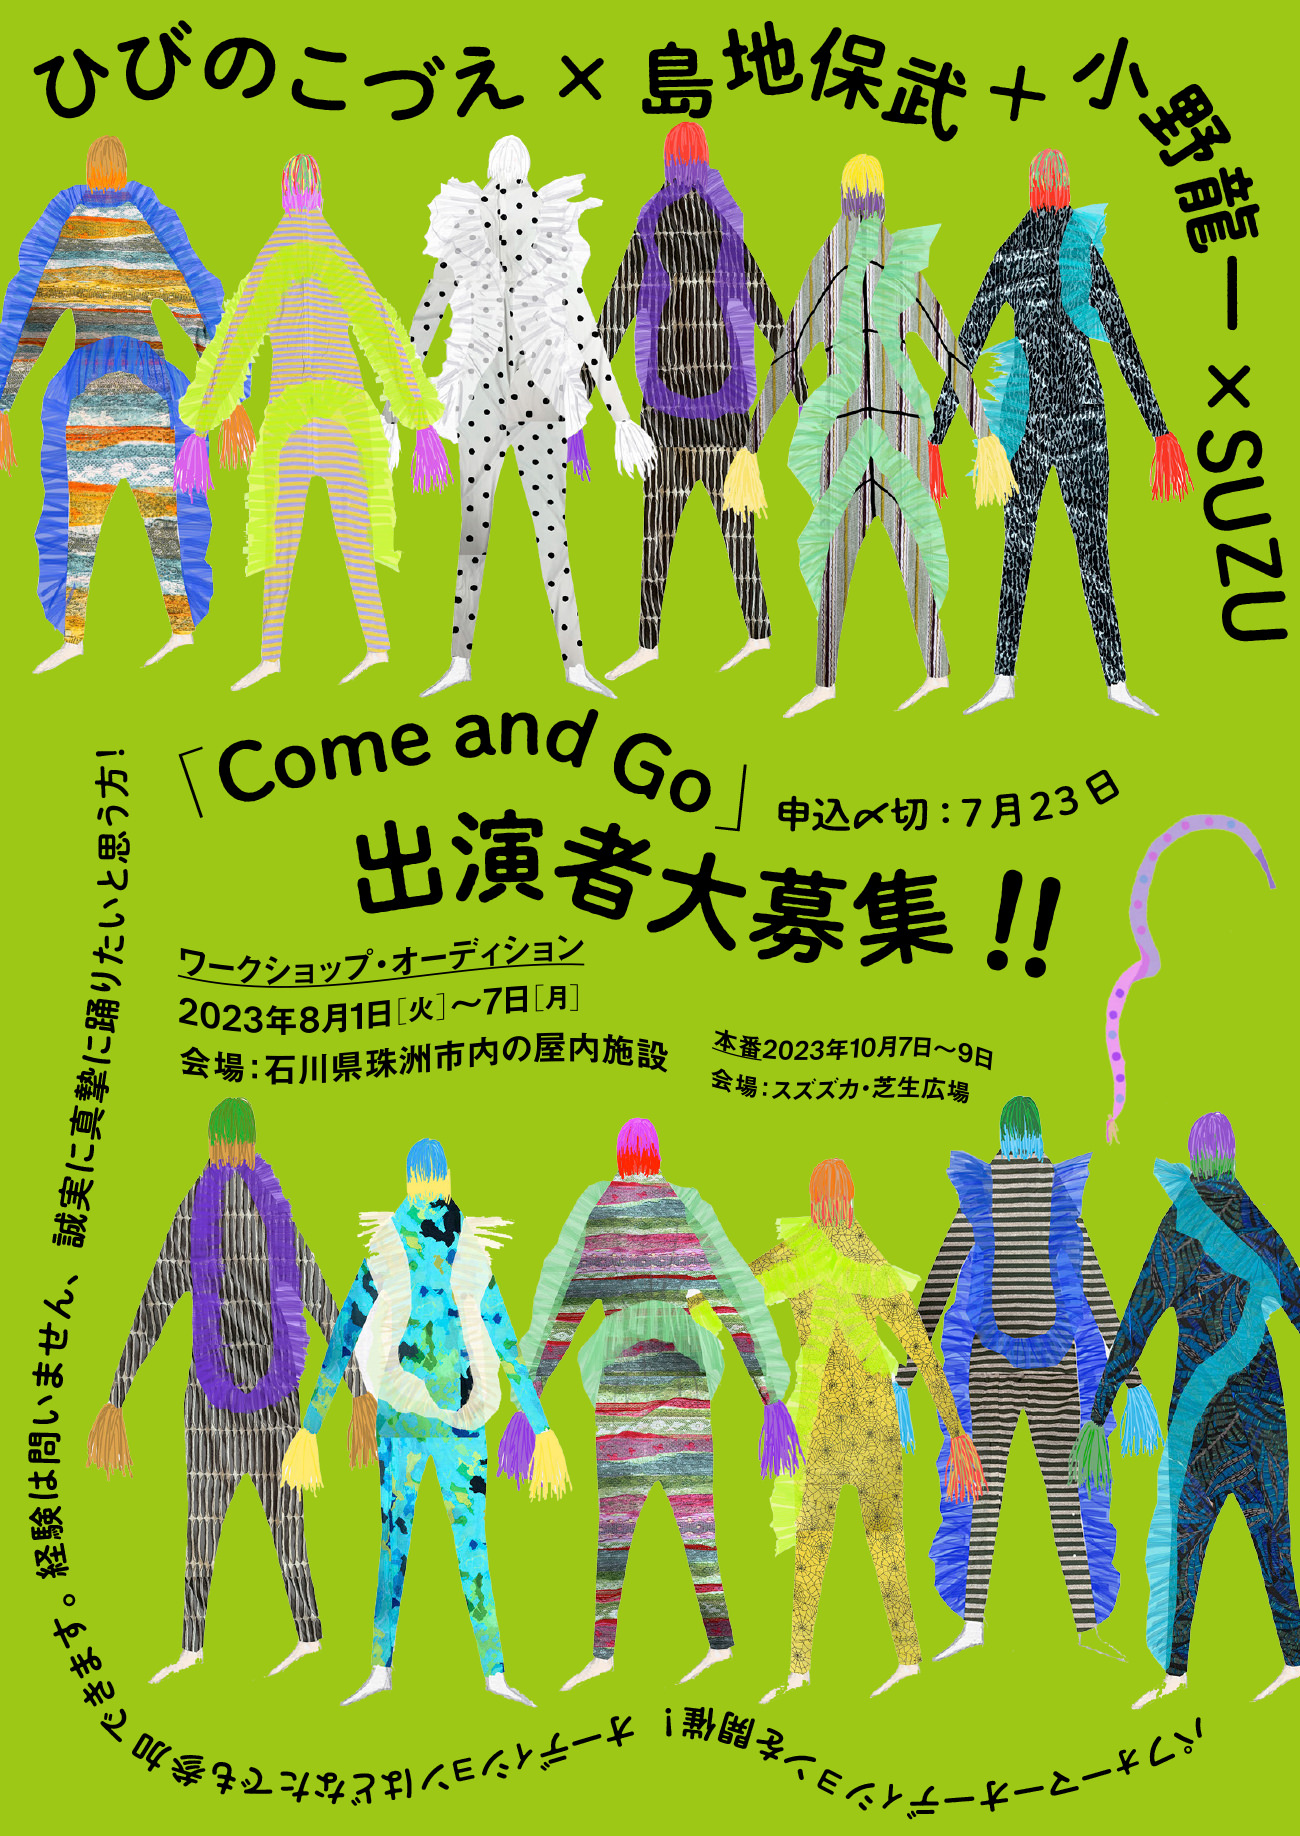 「Come and Go」出演者大募集！！